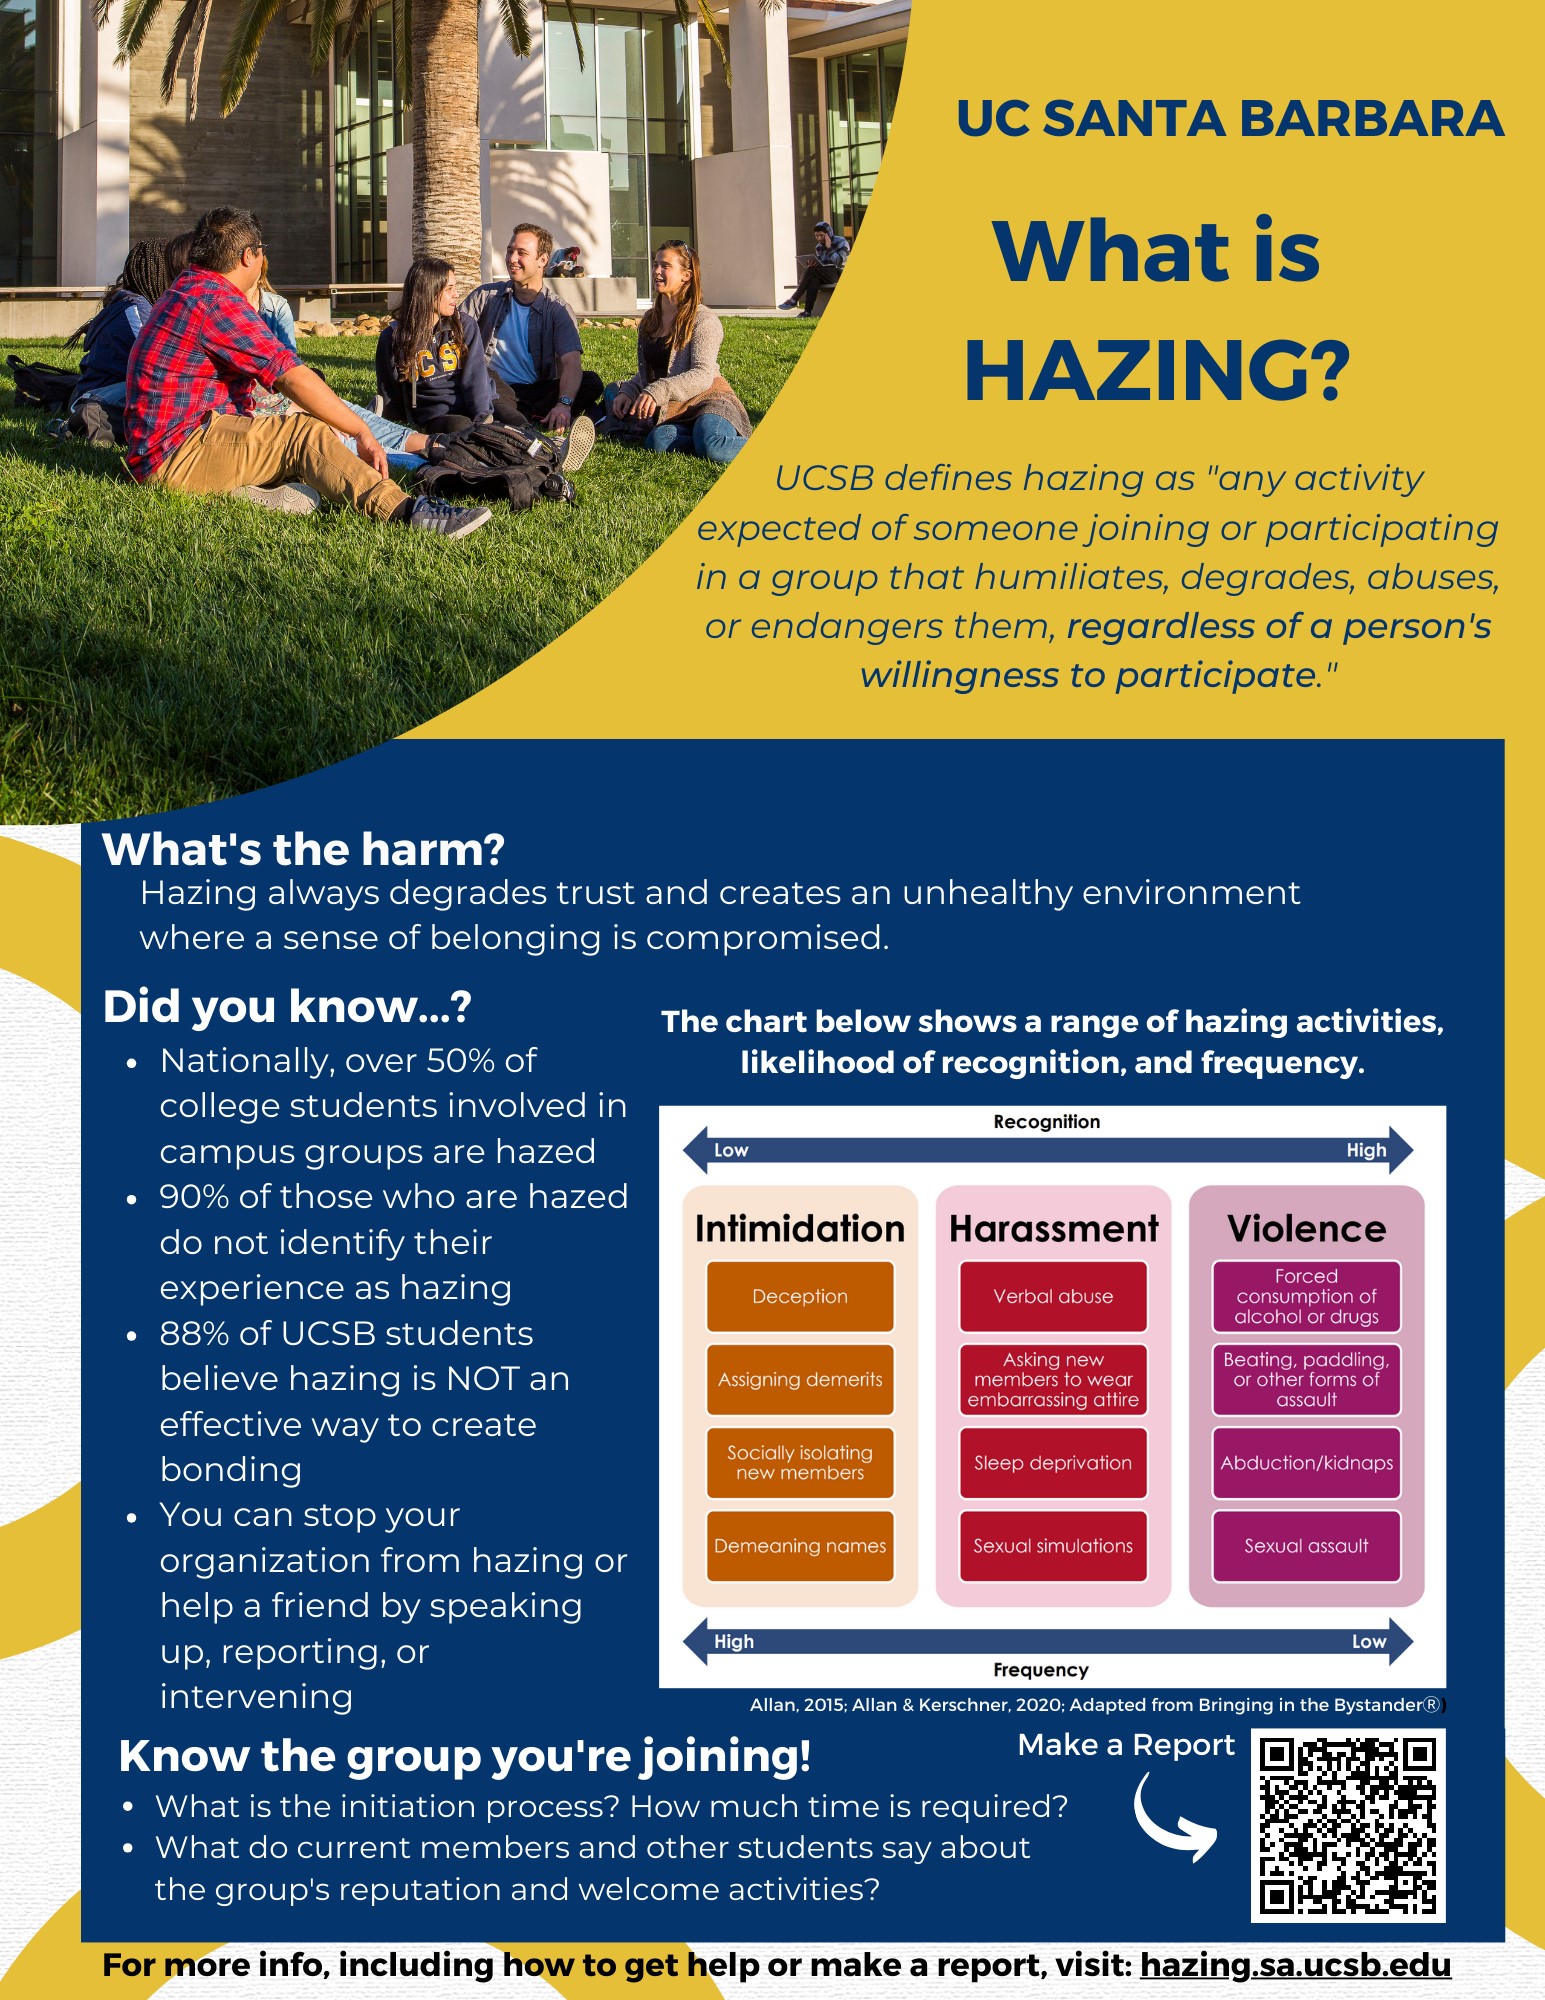 A handout titled What is Hazing?